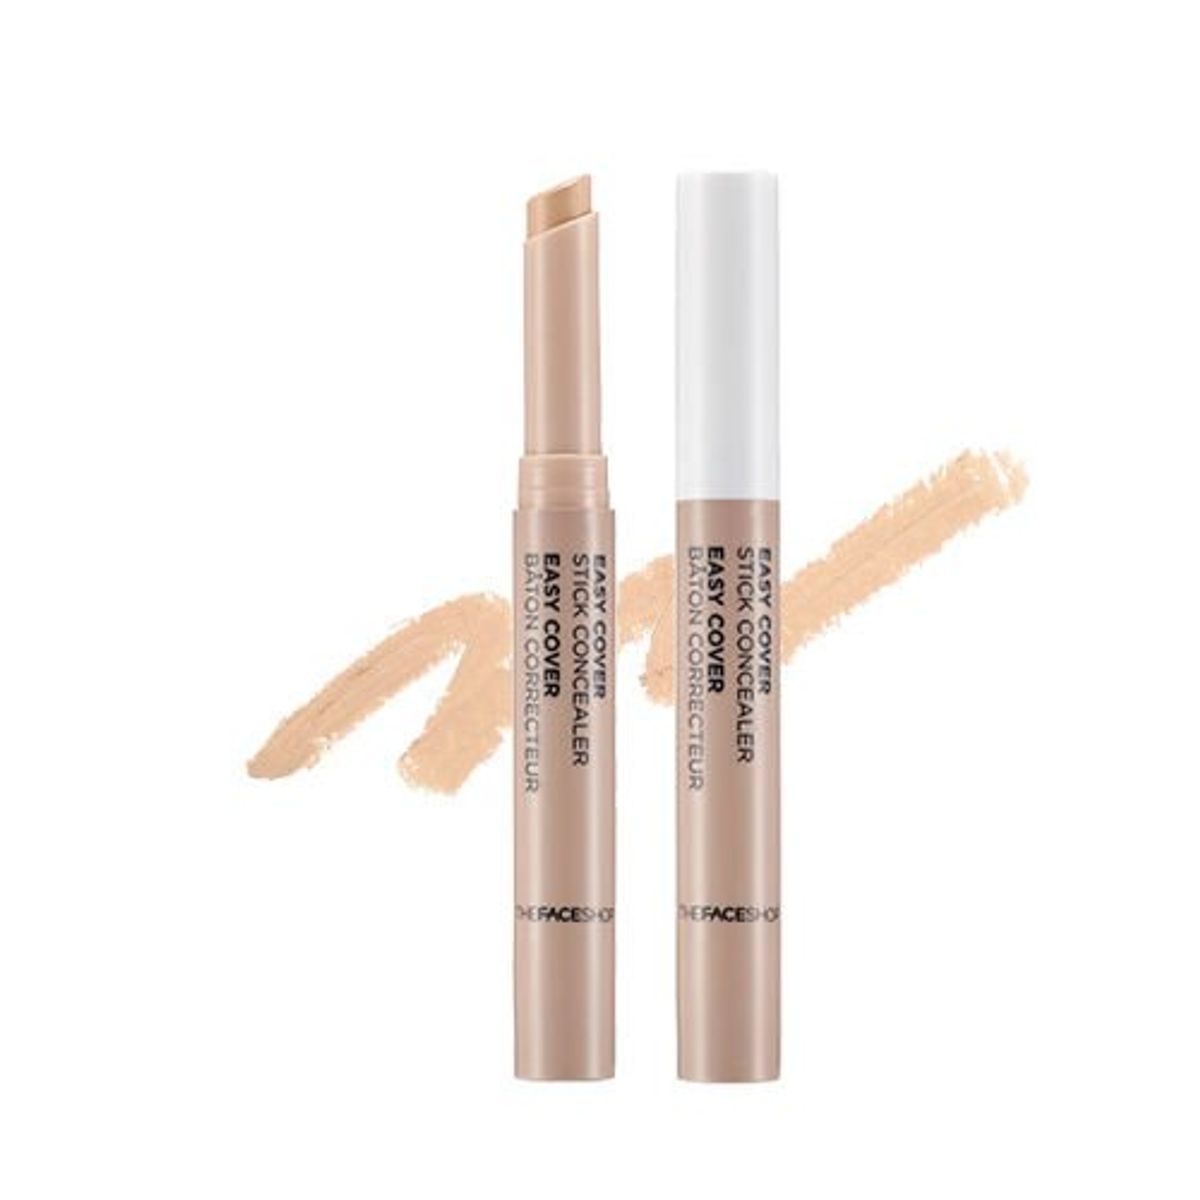 thanh-che-khuyet-diem-tfs-easy-cover-stick-concealer-1